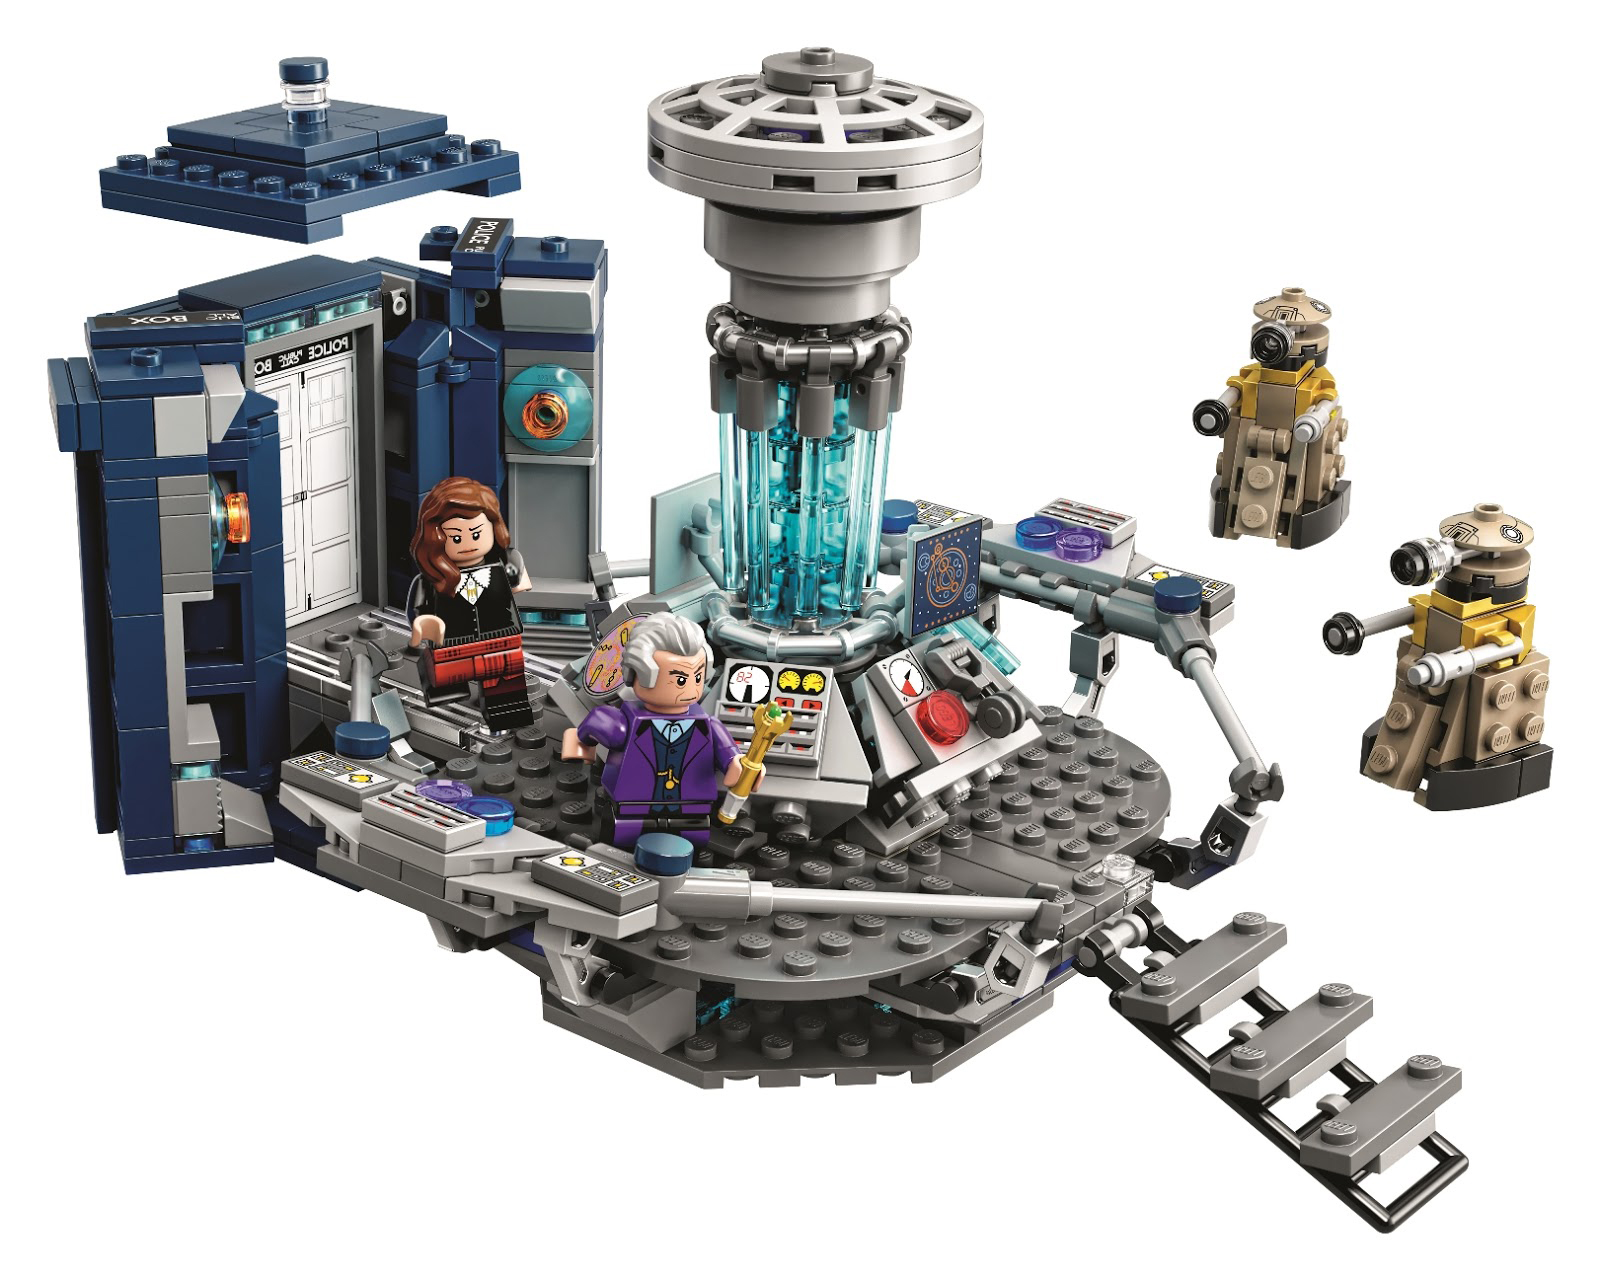 Here are the amazing Doctor Who LEGO sets you wanted